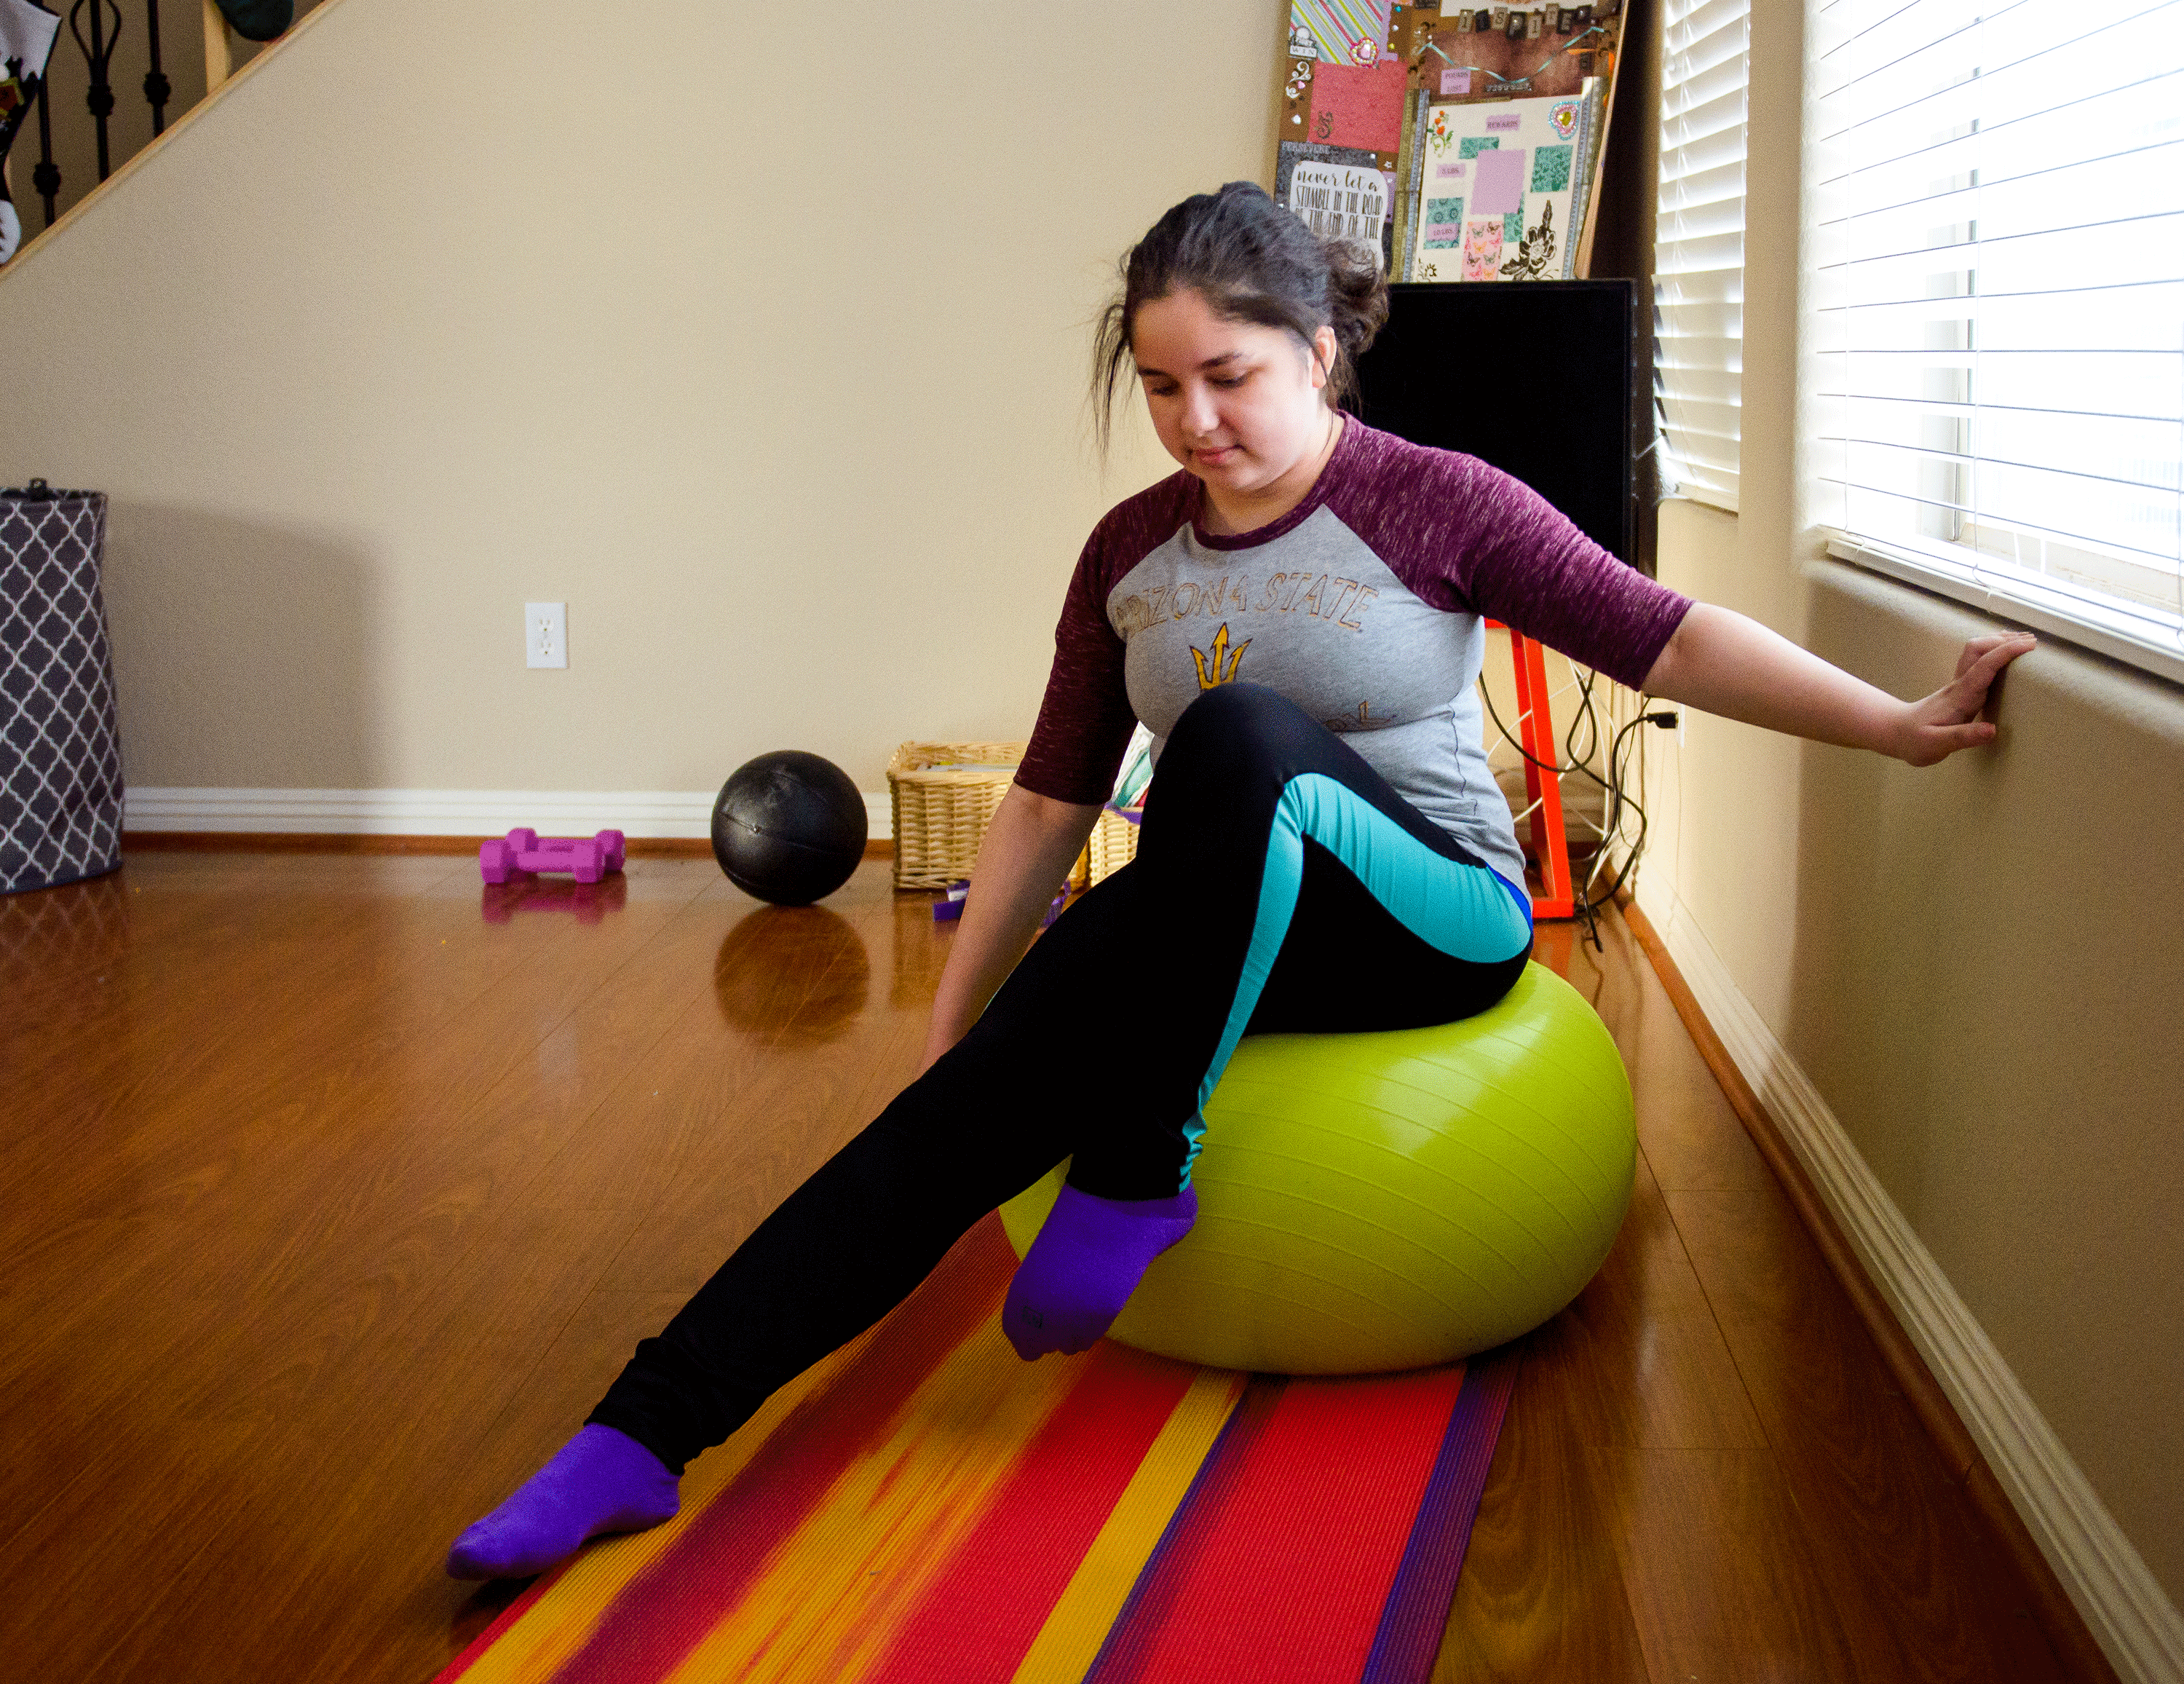 Maya Rodriguez does physical therapy on an exercise ball in her living room